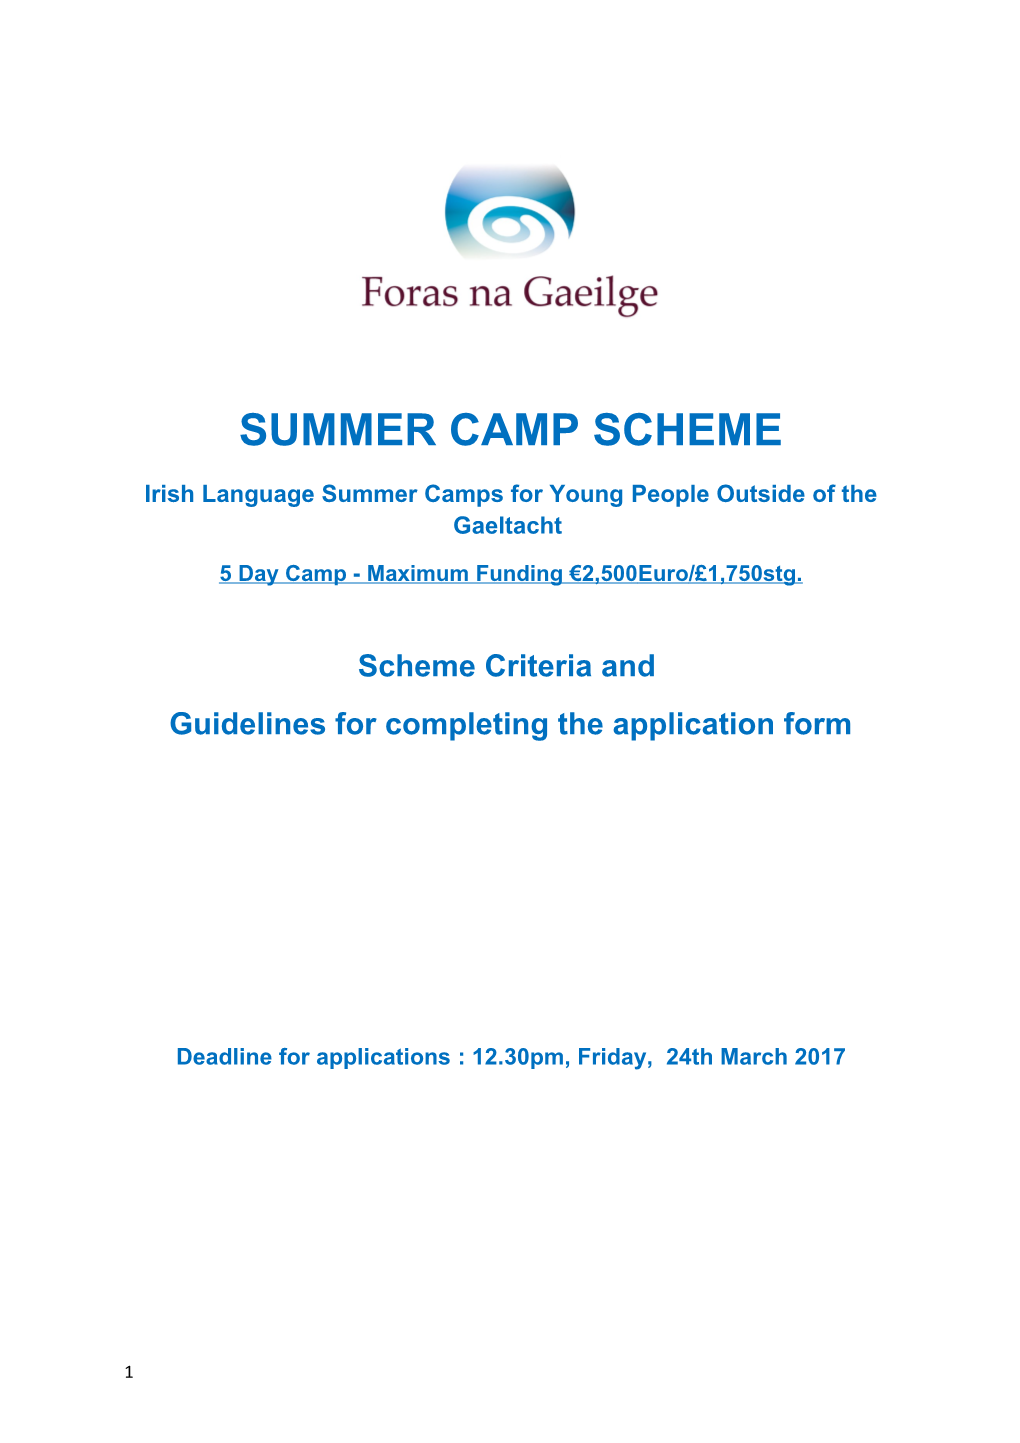 Irish Language Summer Camps for Young People Outside of the Gaeltacht